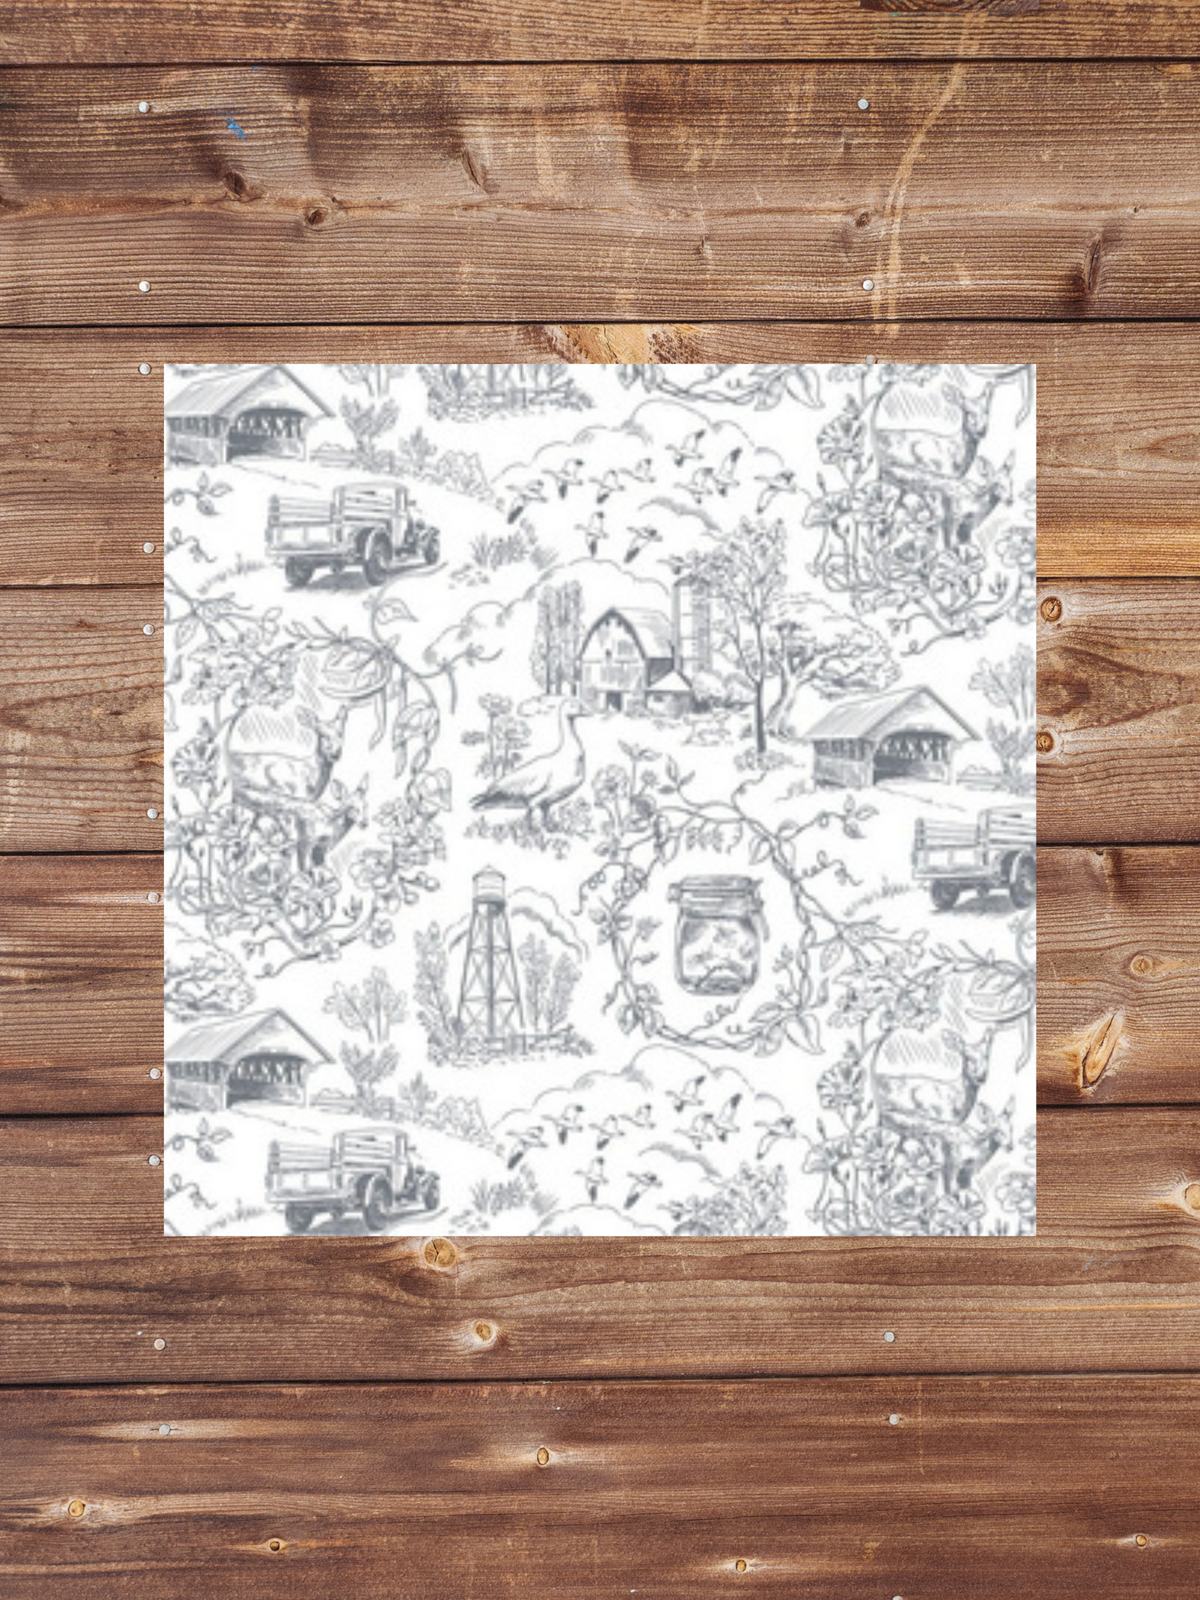 Carseat tent - Farm Toile Tent - DBC Baby Bedding Co 